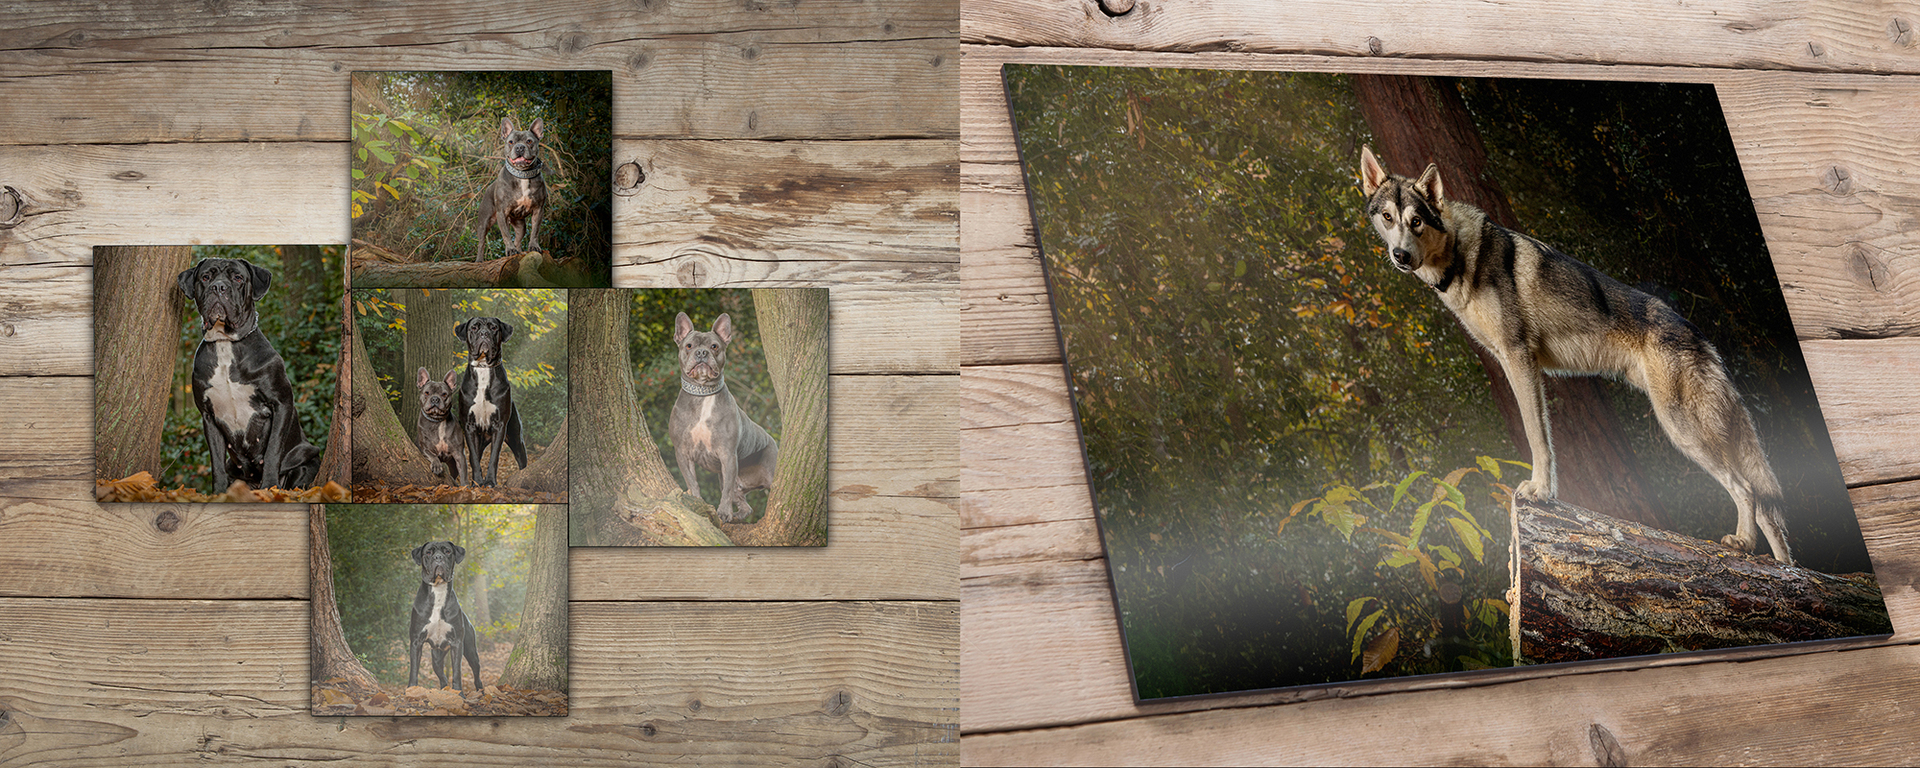 dog photography for your home displayed as Photography Gallery Panels